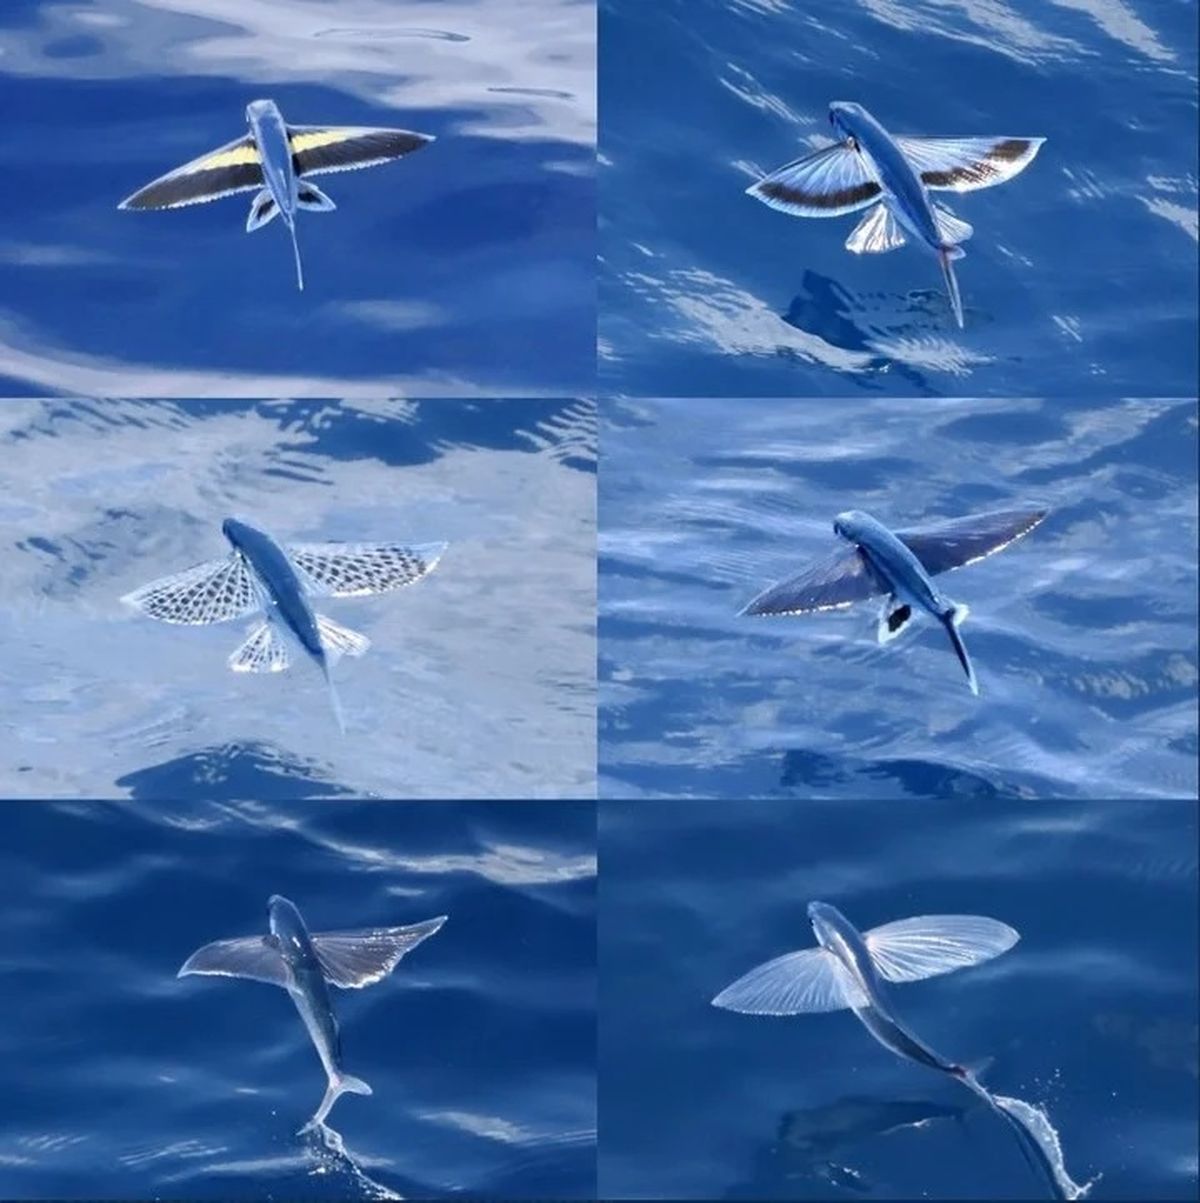 Researchers Photographed Flying Fish That, According To Their Estimates, Belong To At Least Six Species